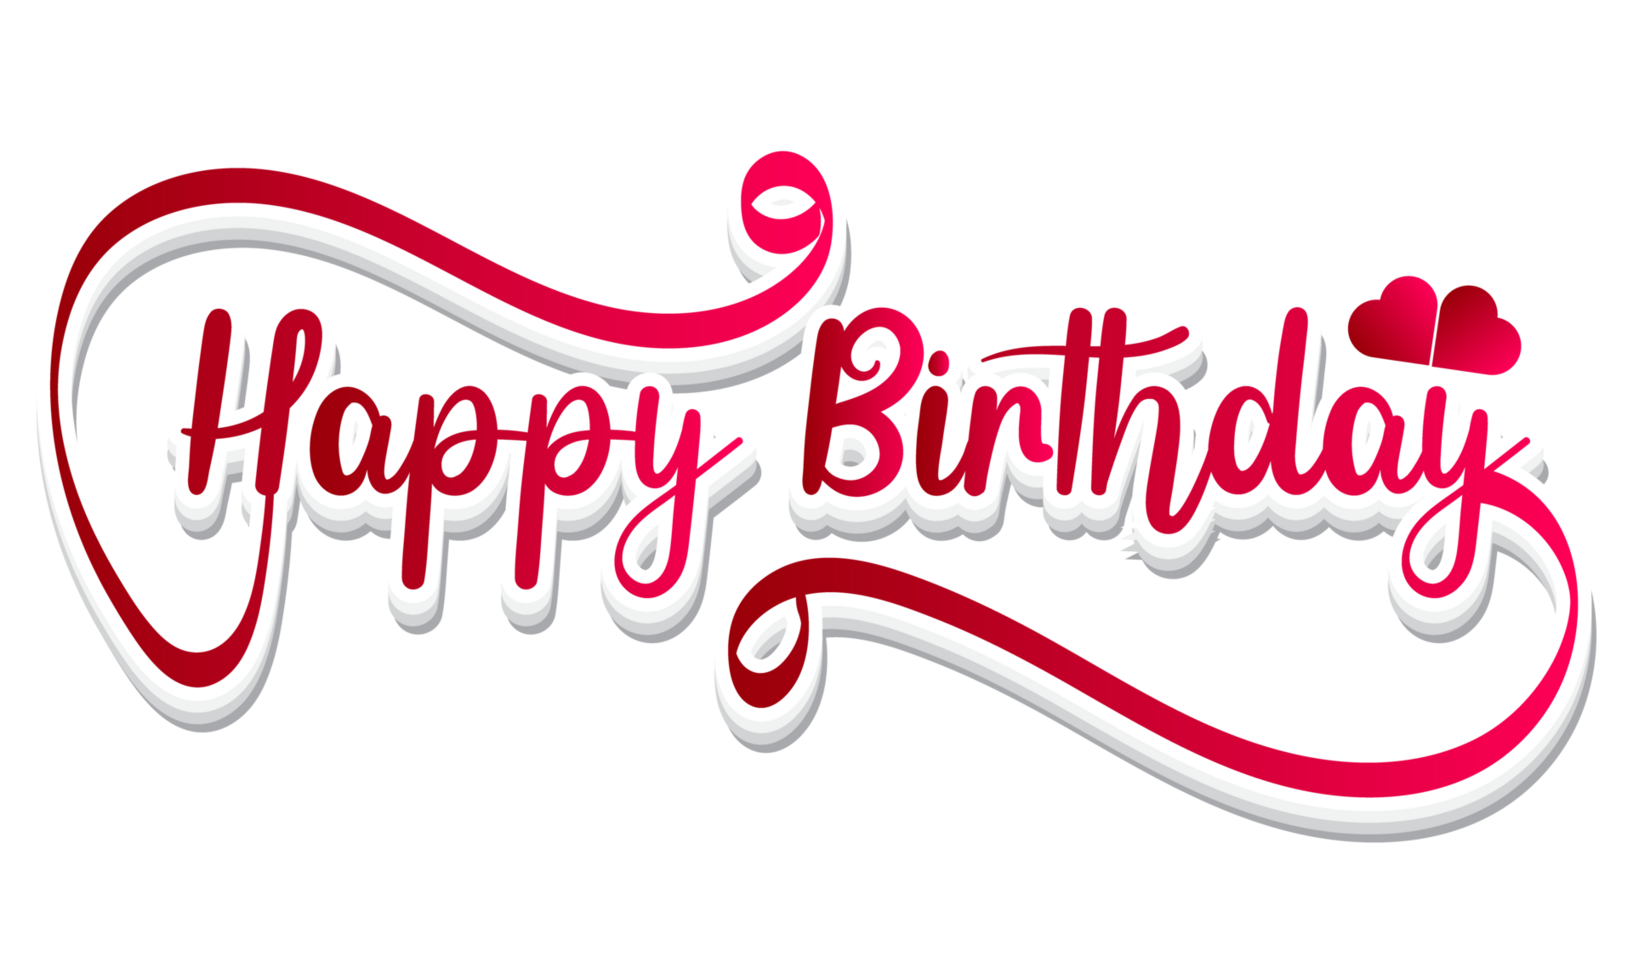 Happy birthday design with heart background png